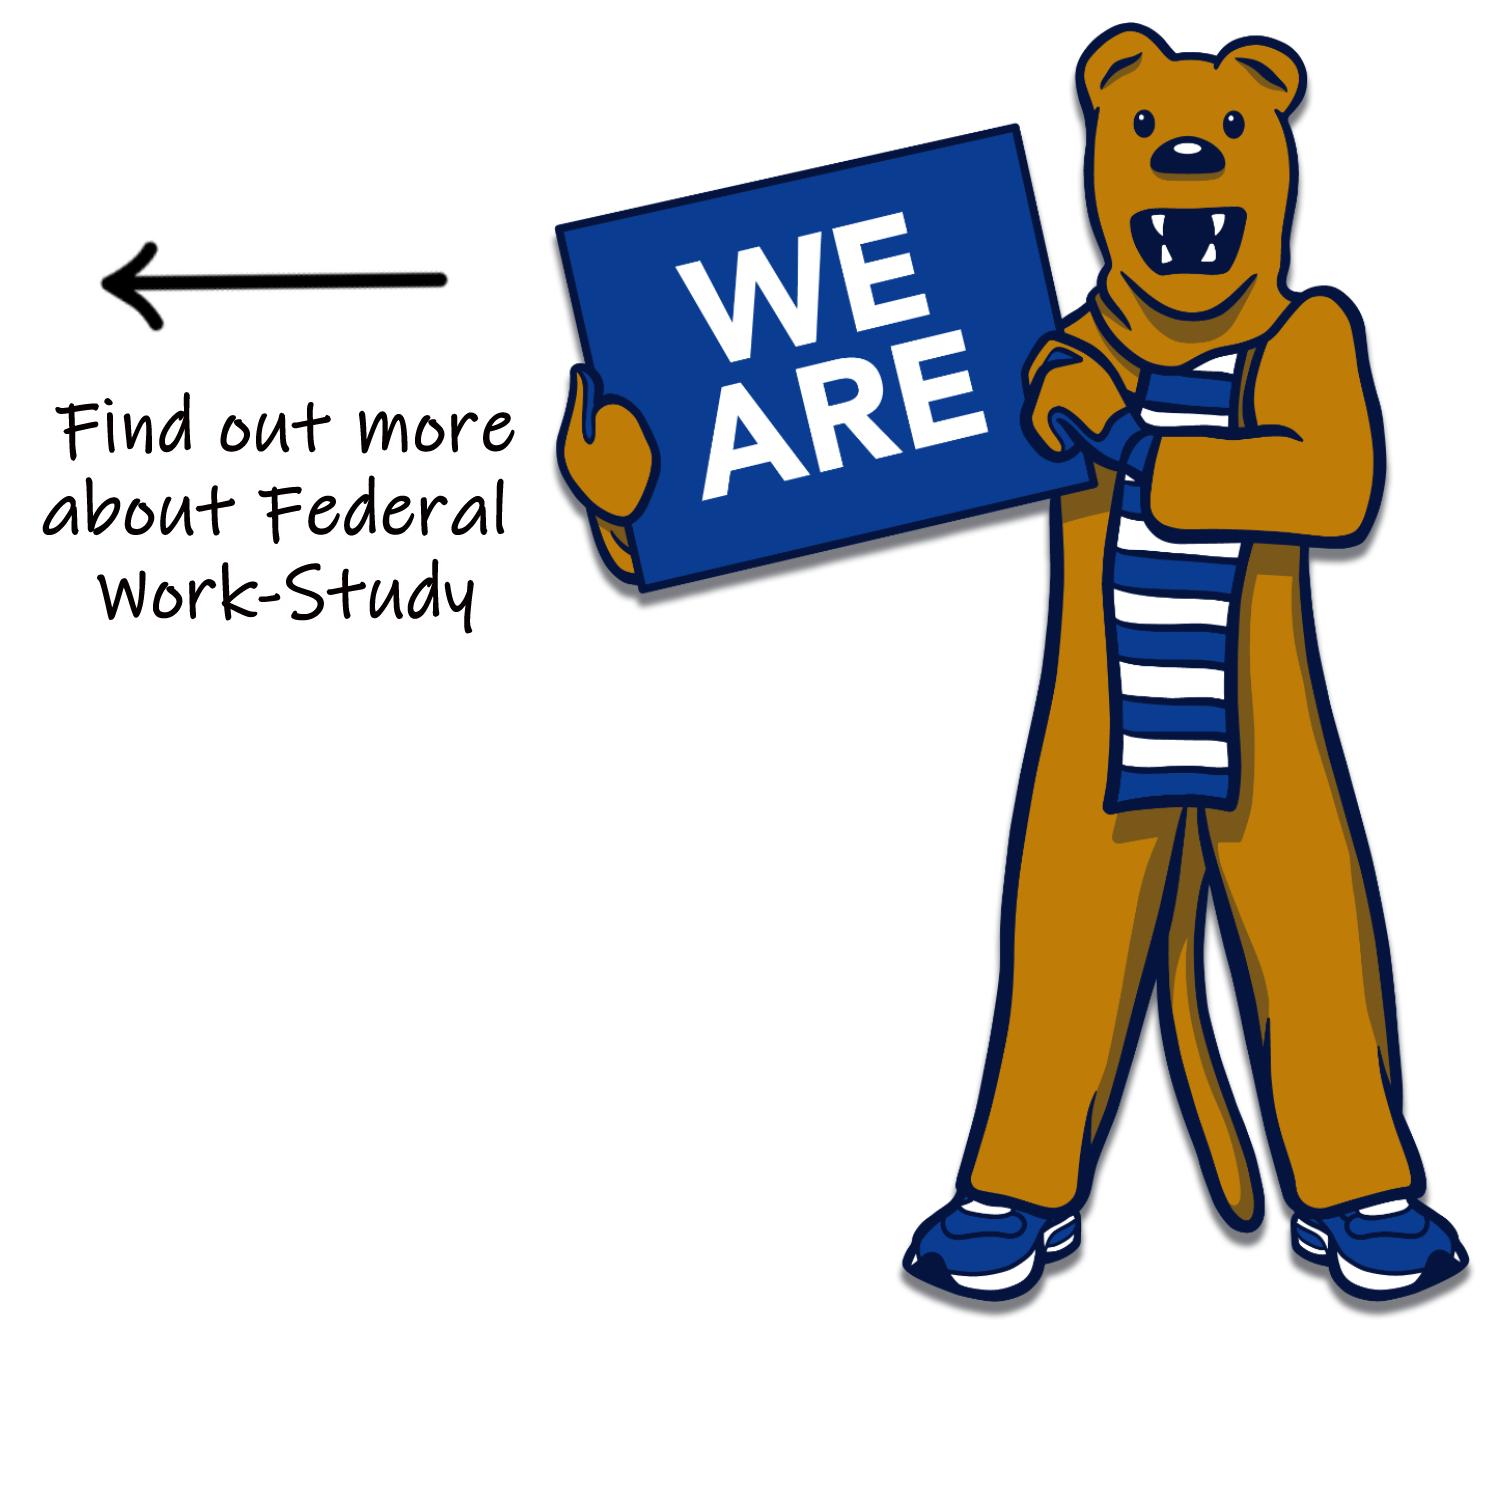 Cartoon Nittany Lion with we are placard. Image: Penn State